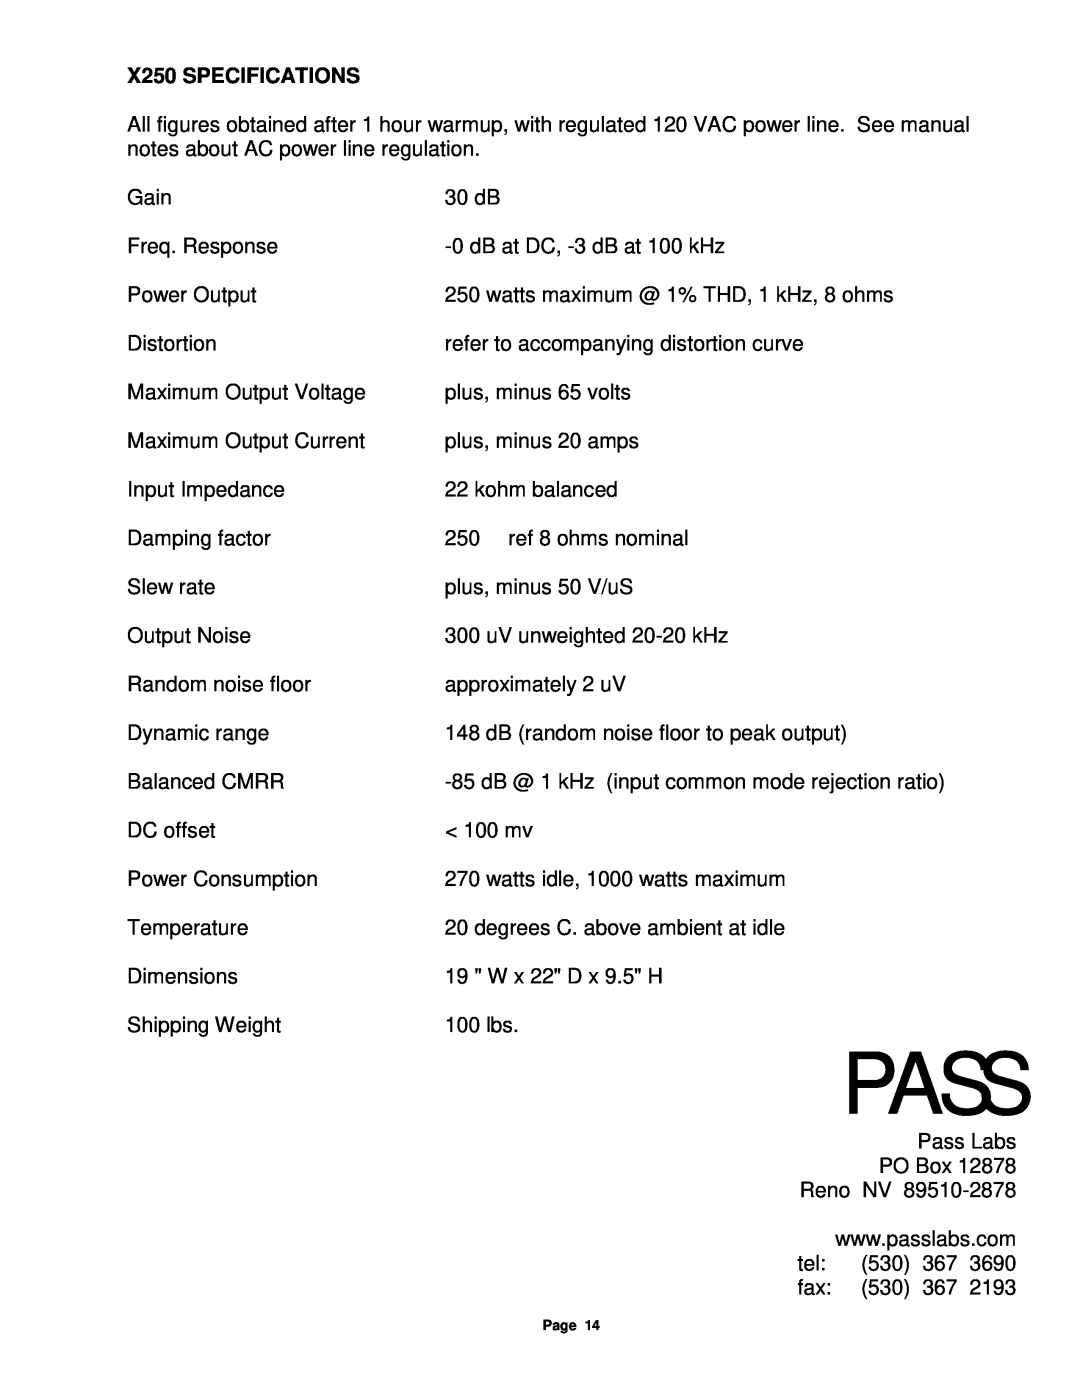 Pass Labs owner manual X250 SPECIFICATIONS, Pass 